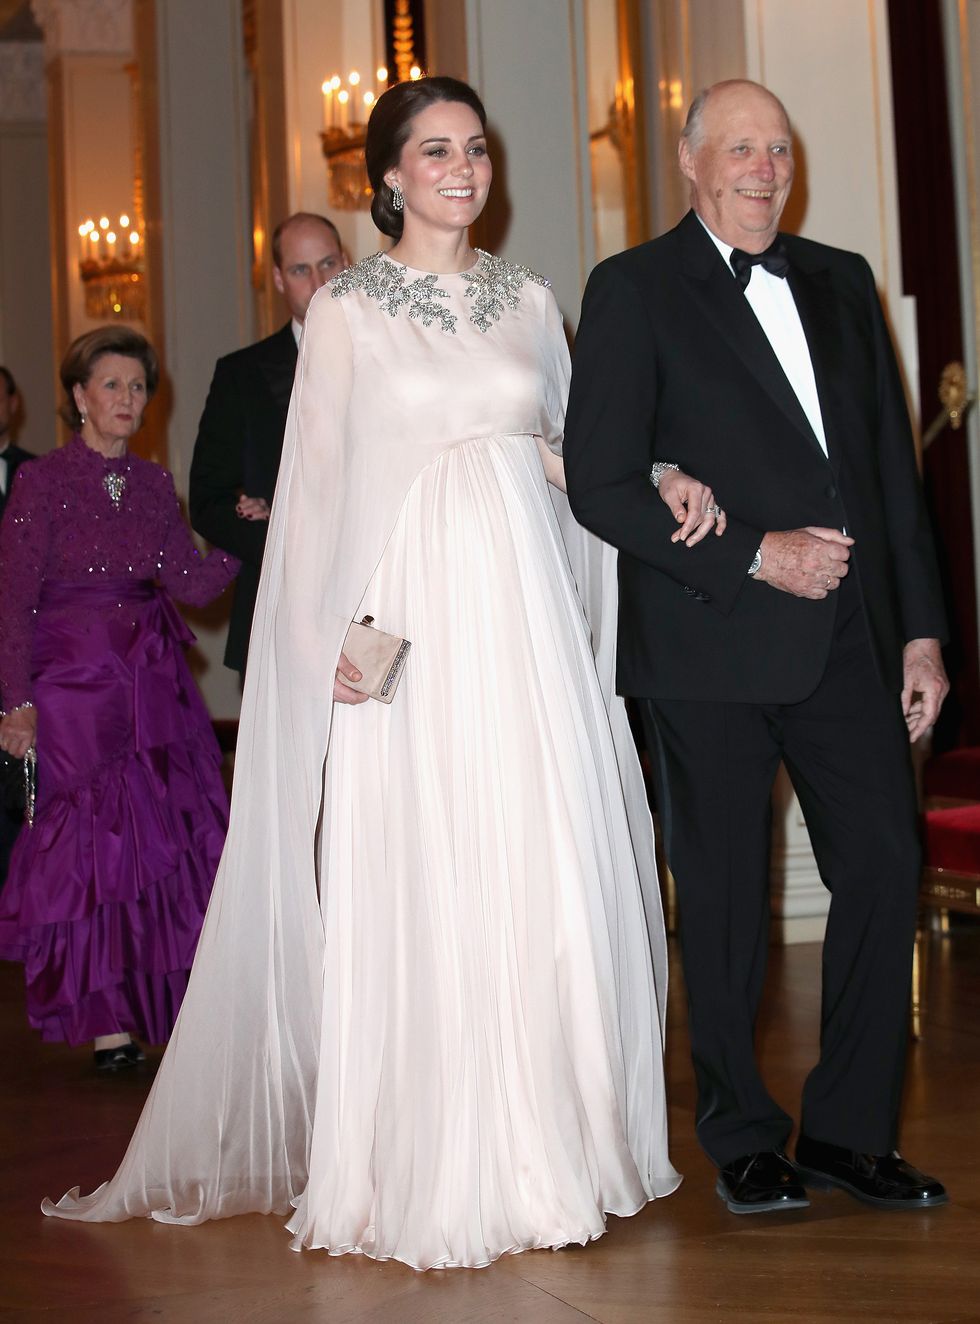 38-escorted-into-dinner-by-king-harald-v-of-norway-at-the-royal-palace-on-day-3-of-her-visit-to-sweden-and-norway-with-prince-william-duke-of-cambridge-on-february-1-2018-in-oslo-norway-1523224530.jpg